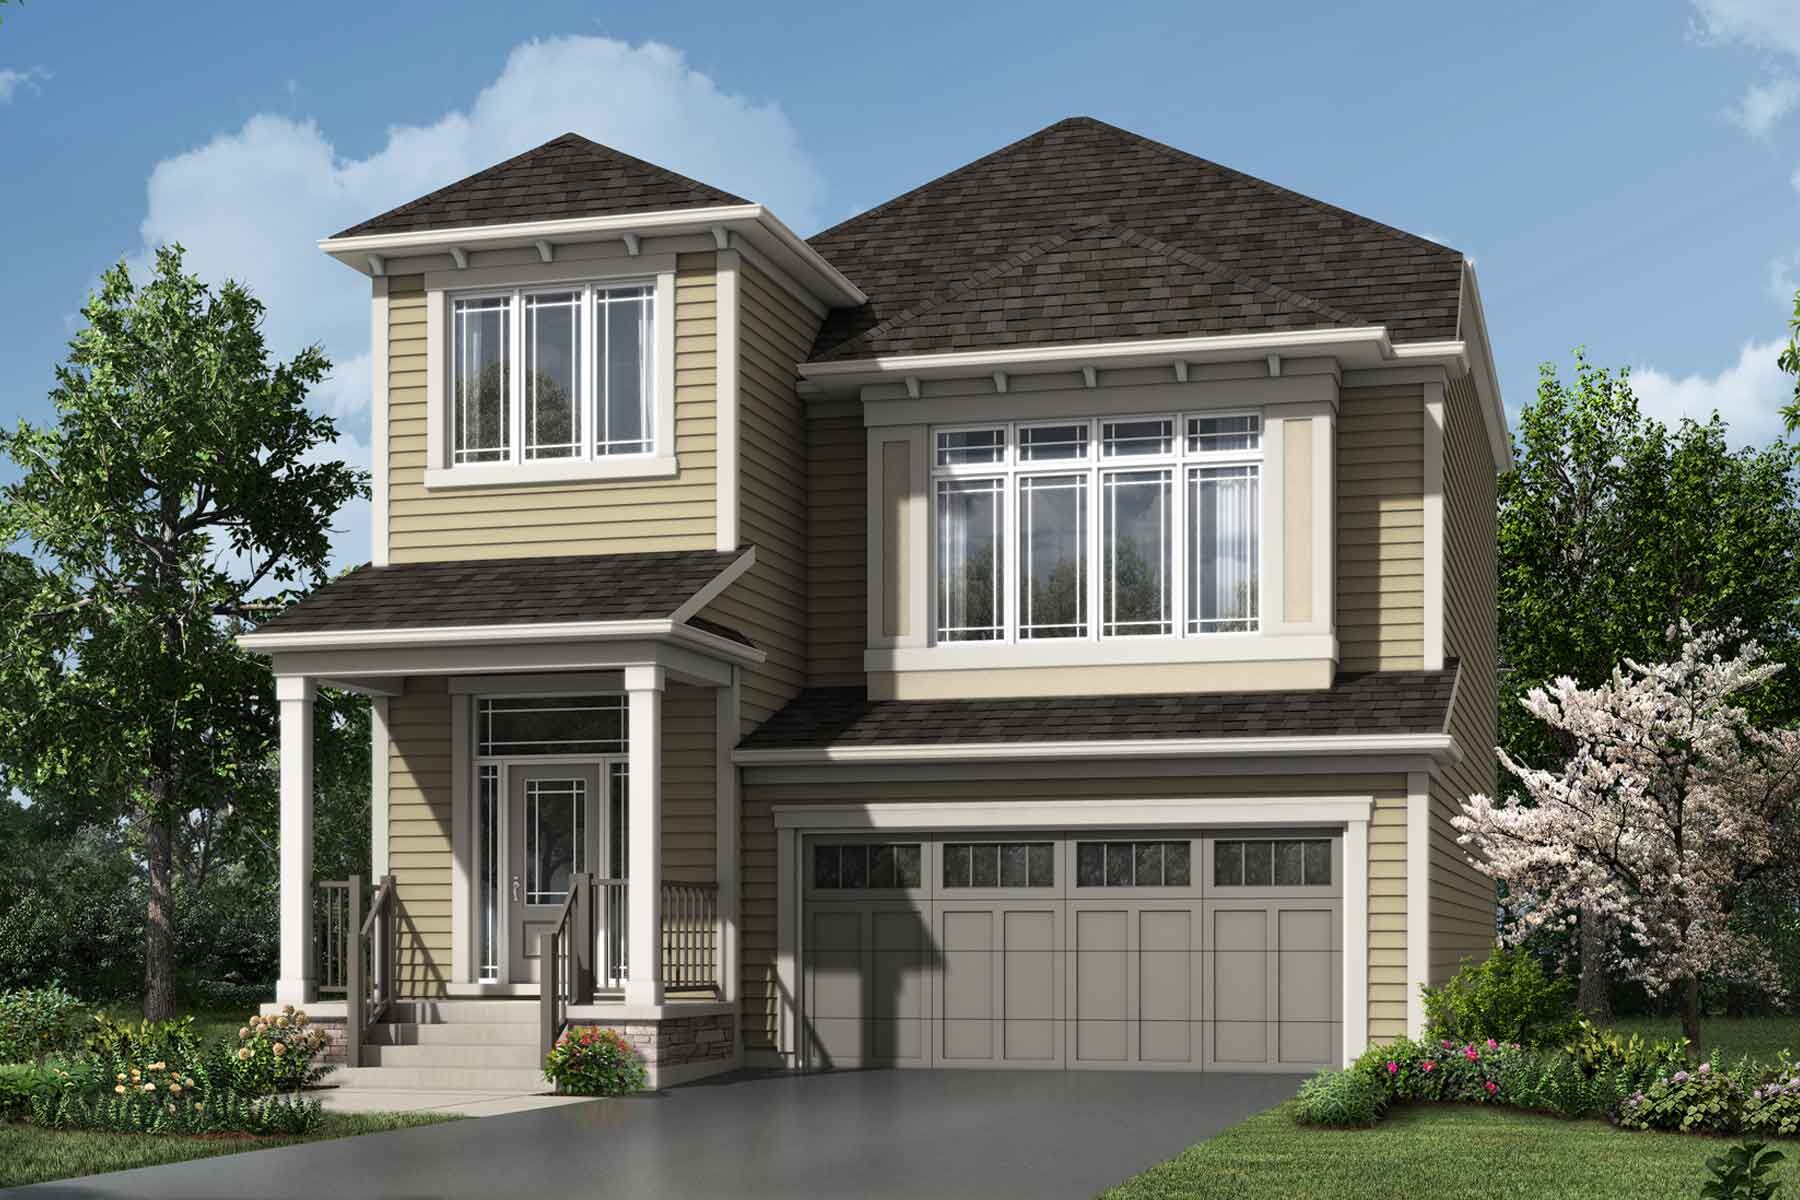 A detached Prairie style home with a double car garage.